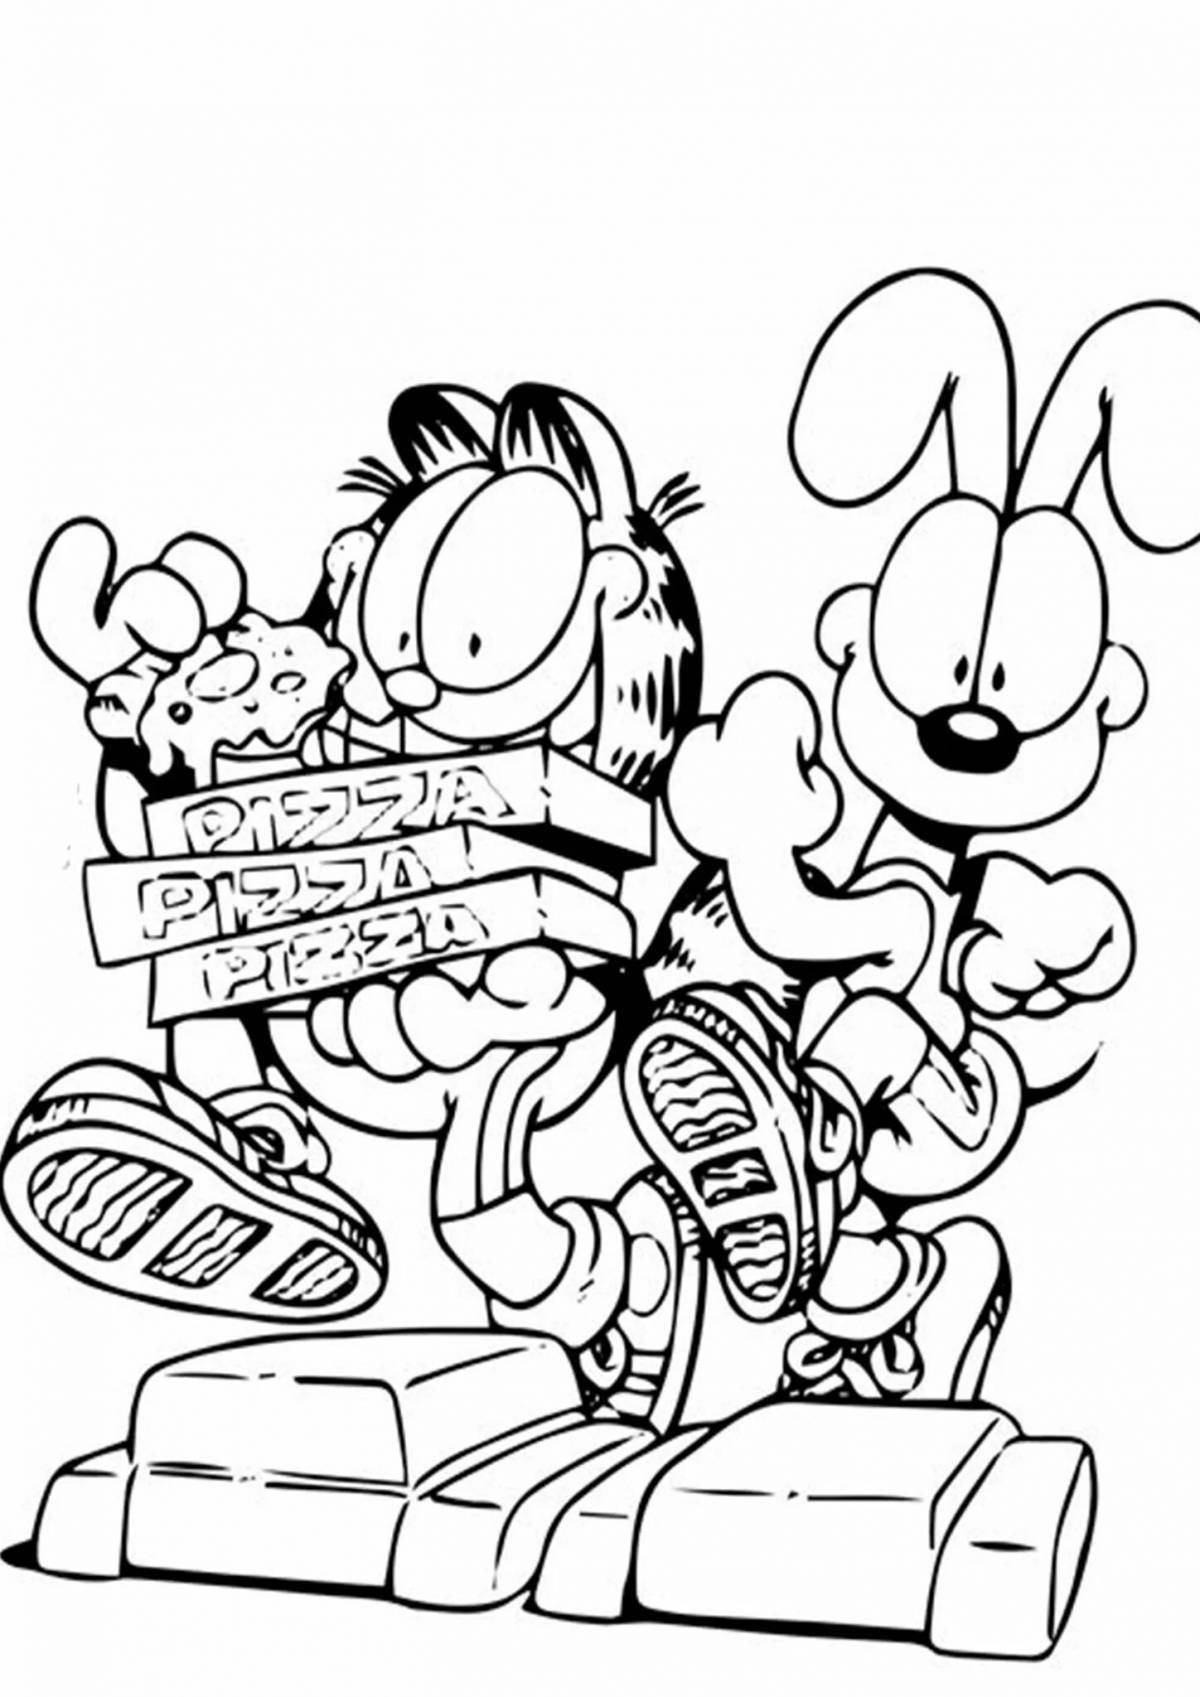 Garfield bright coloring page